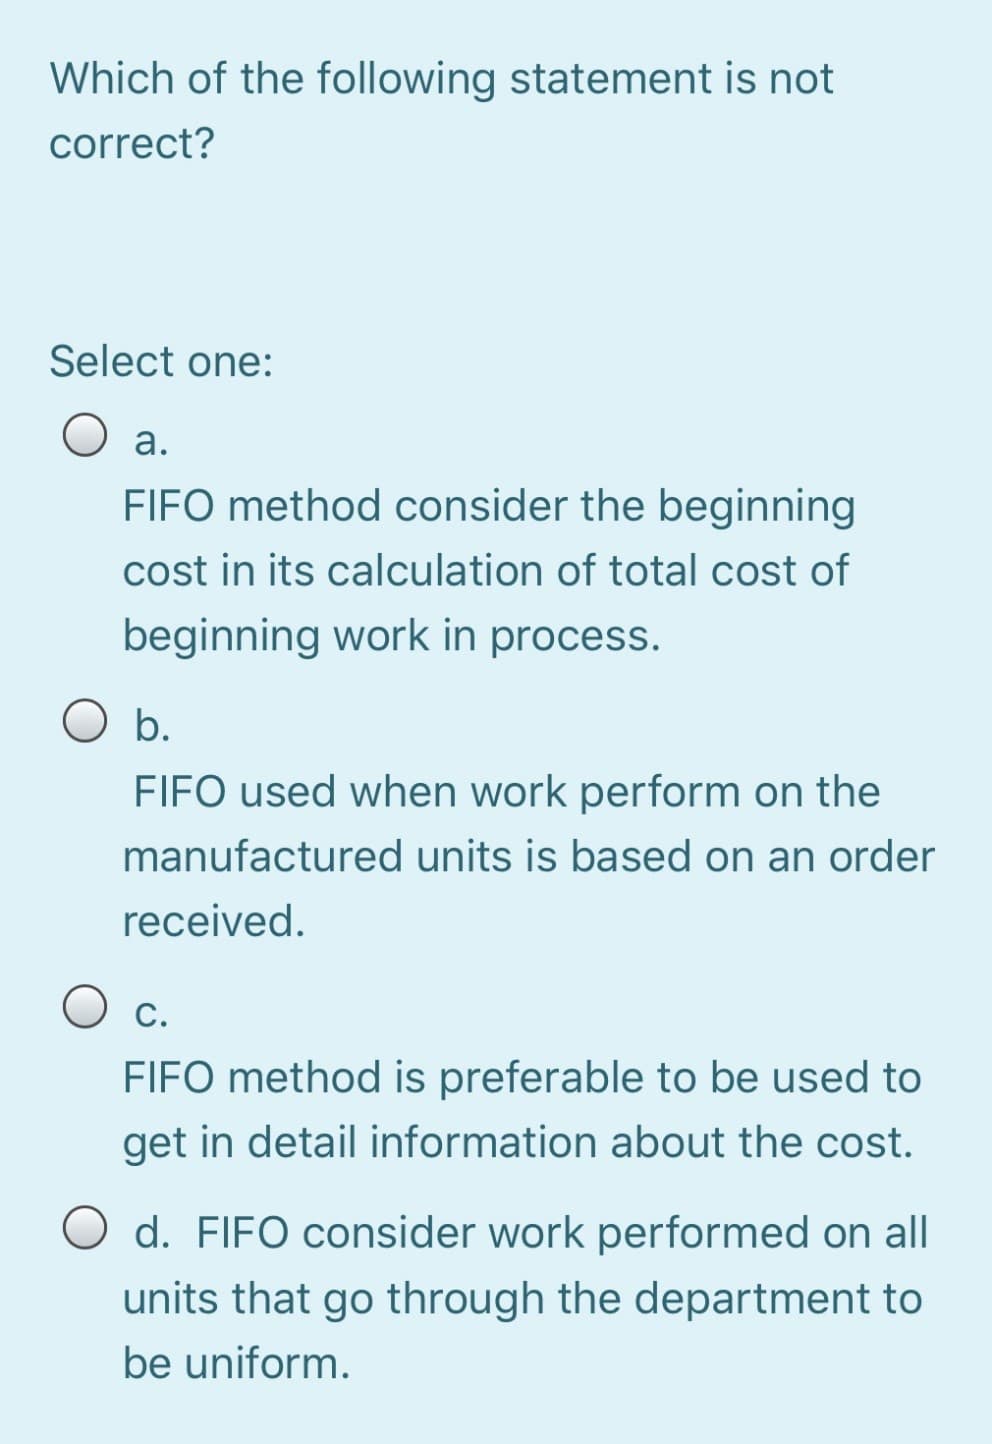 Which of the following statement is not
correct?
Select one:
а.
FIFO method consider the beginning
cost in its calculation of total cost of
beginning work in process.
b.
FIFO used when work perform on the
manufactured units is based on an order
received.
Ос.
FIFO method is preferable to be used to
get in detail information about the cost.
d. FIFO consider work performed on all
units that go through the department to
be uniform.
